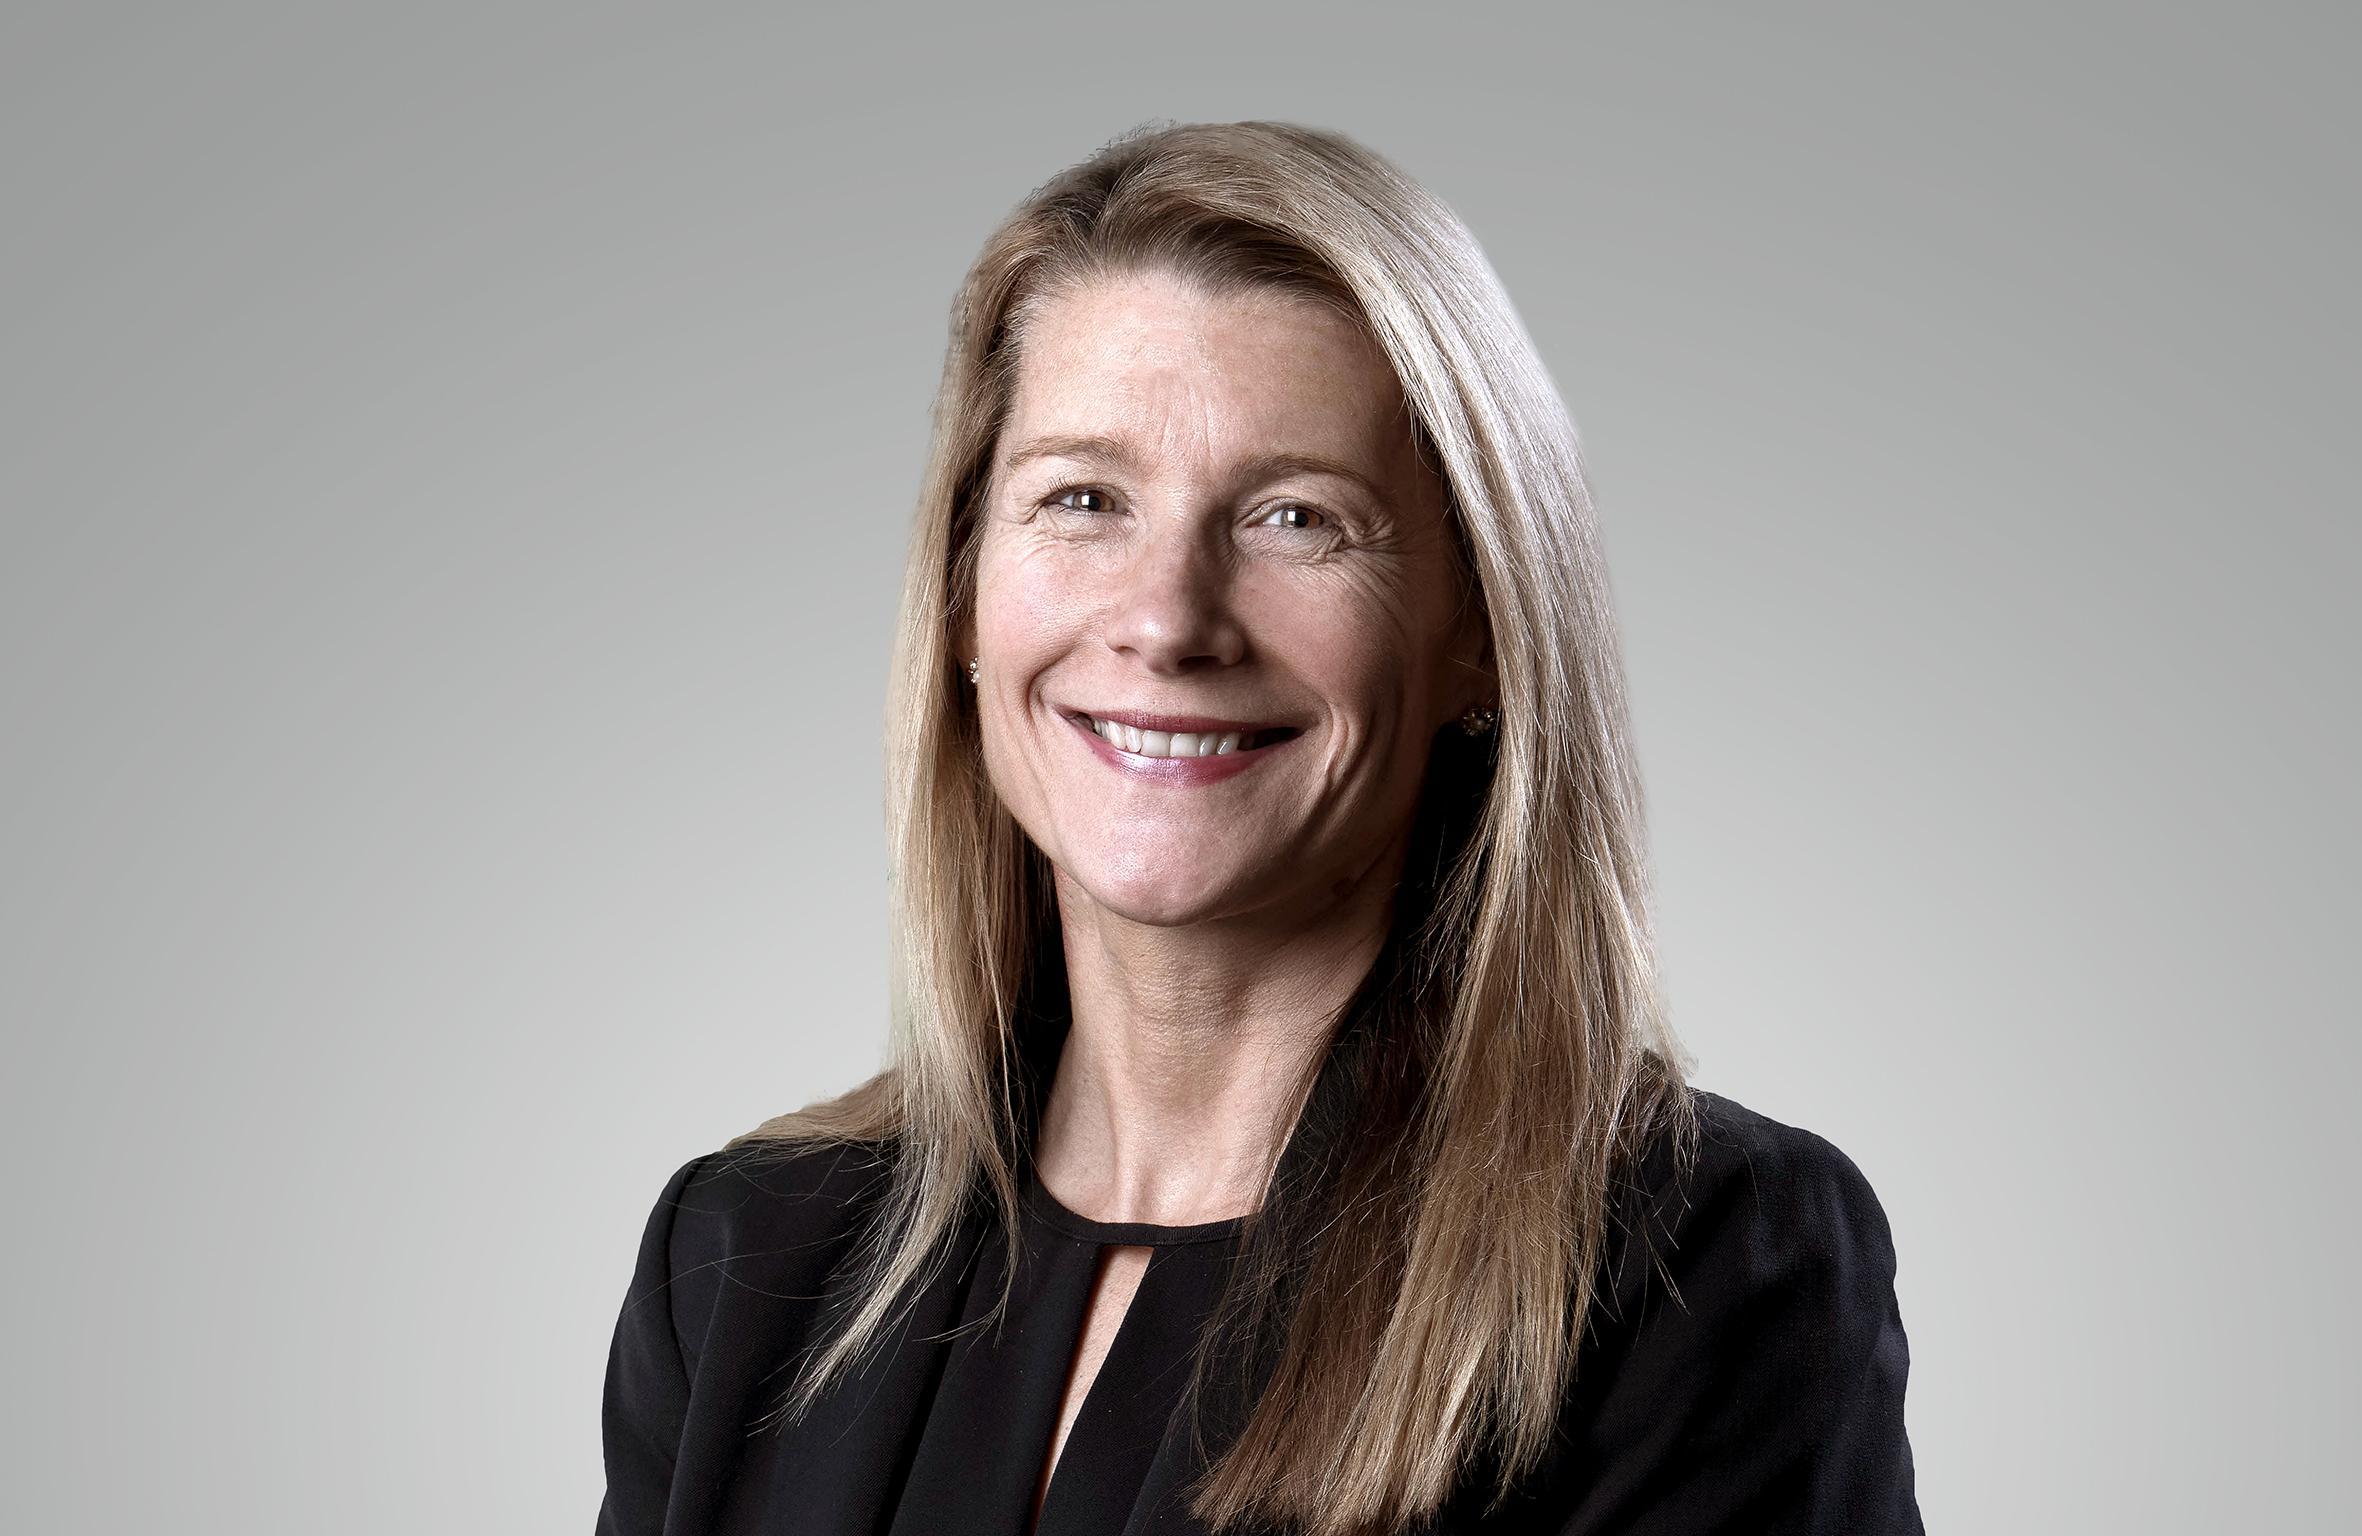 Audrey Ryan manages Kames Capital's Ethical Equity fund. It excludes tobacco, pornography, oil and gas, GM, nuclear power, gambling, environmentally damaging and poor animal welfare stocks